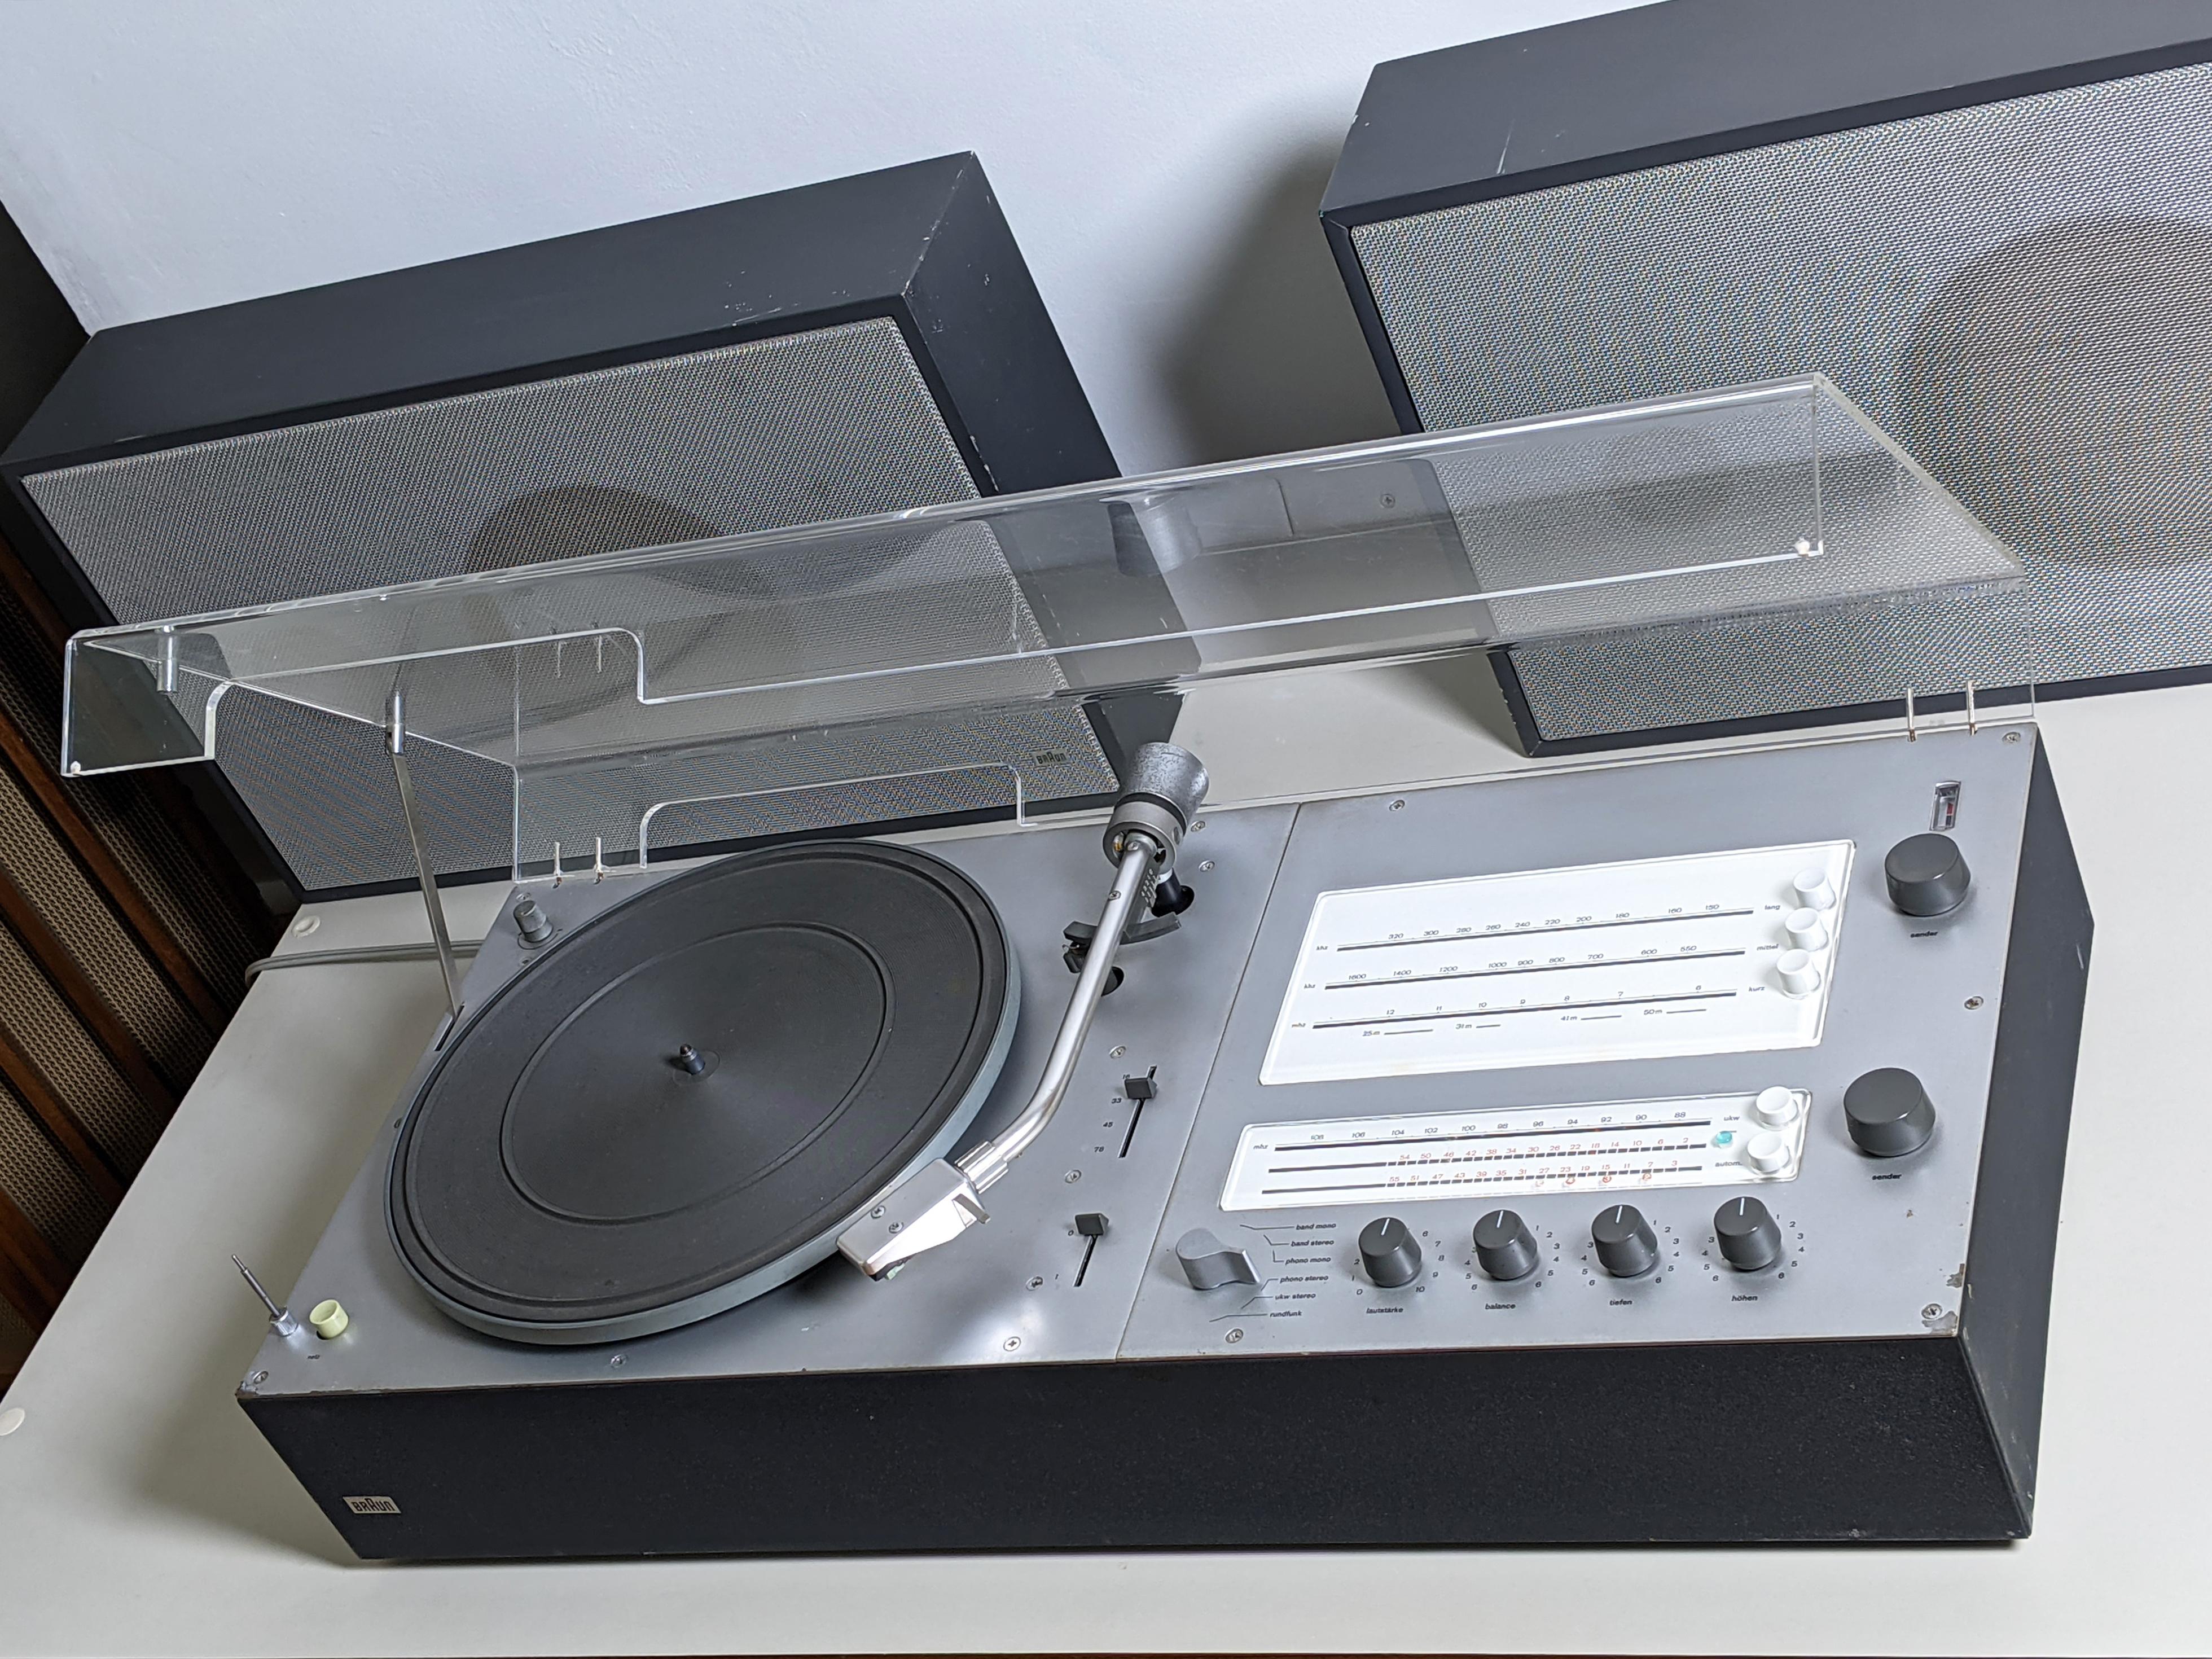 Dieter Rams (designer), 1967
Braun AG, Germany (manufacturer)

- Audio 250 radiogram / record player Typ (model) TC 45/3
- Braun Typ (model) L 450/1 loudspeakers (matching to radiogram)

Complete hi-fi system incorporating turntable (record